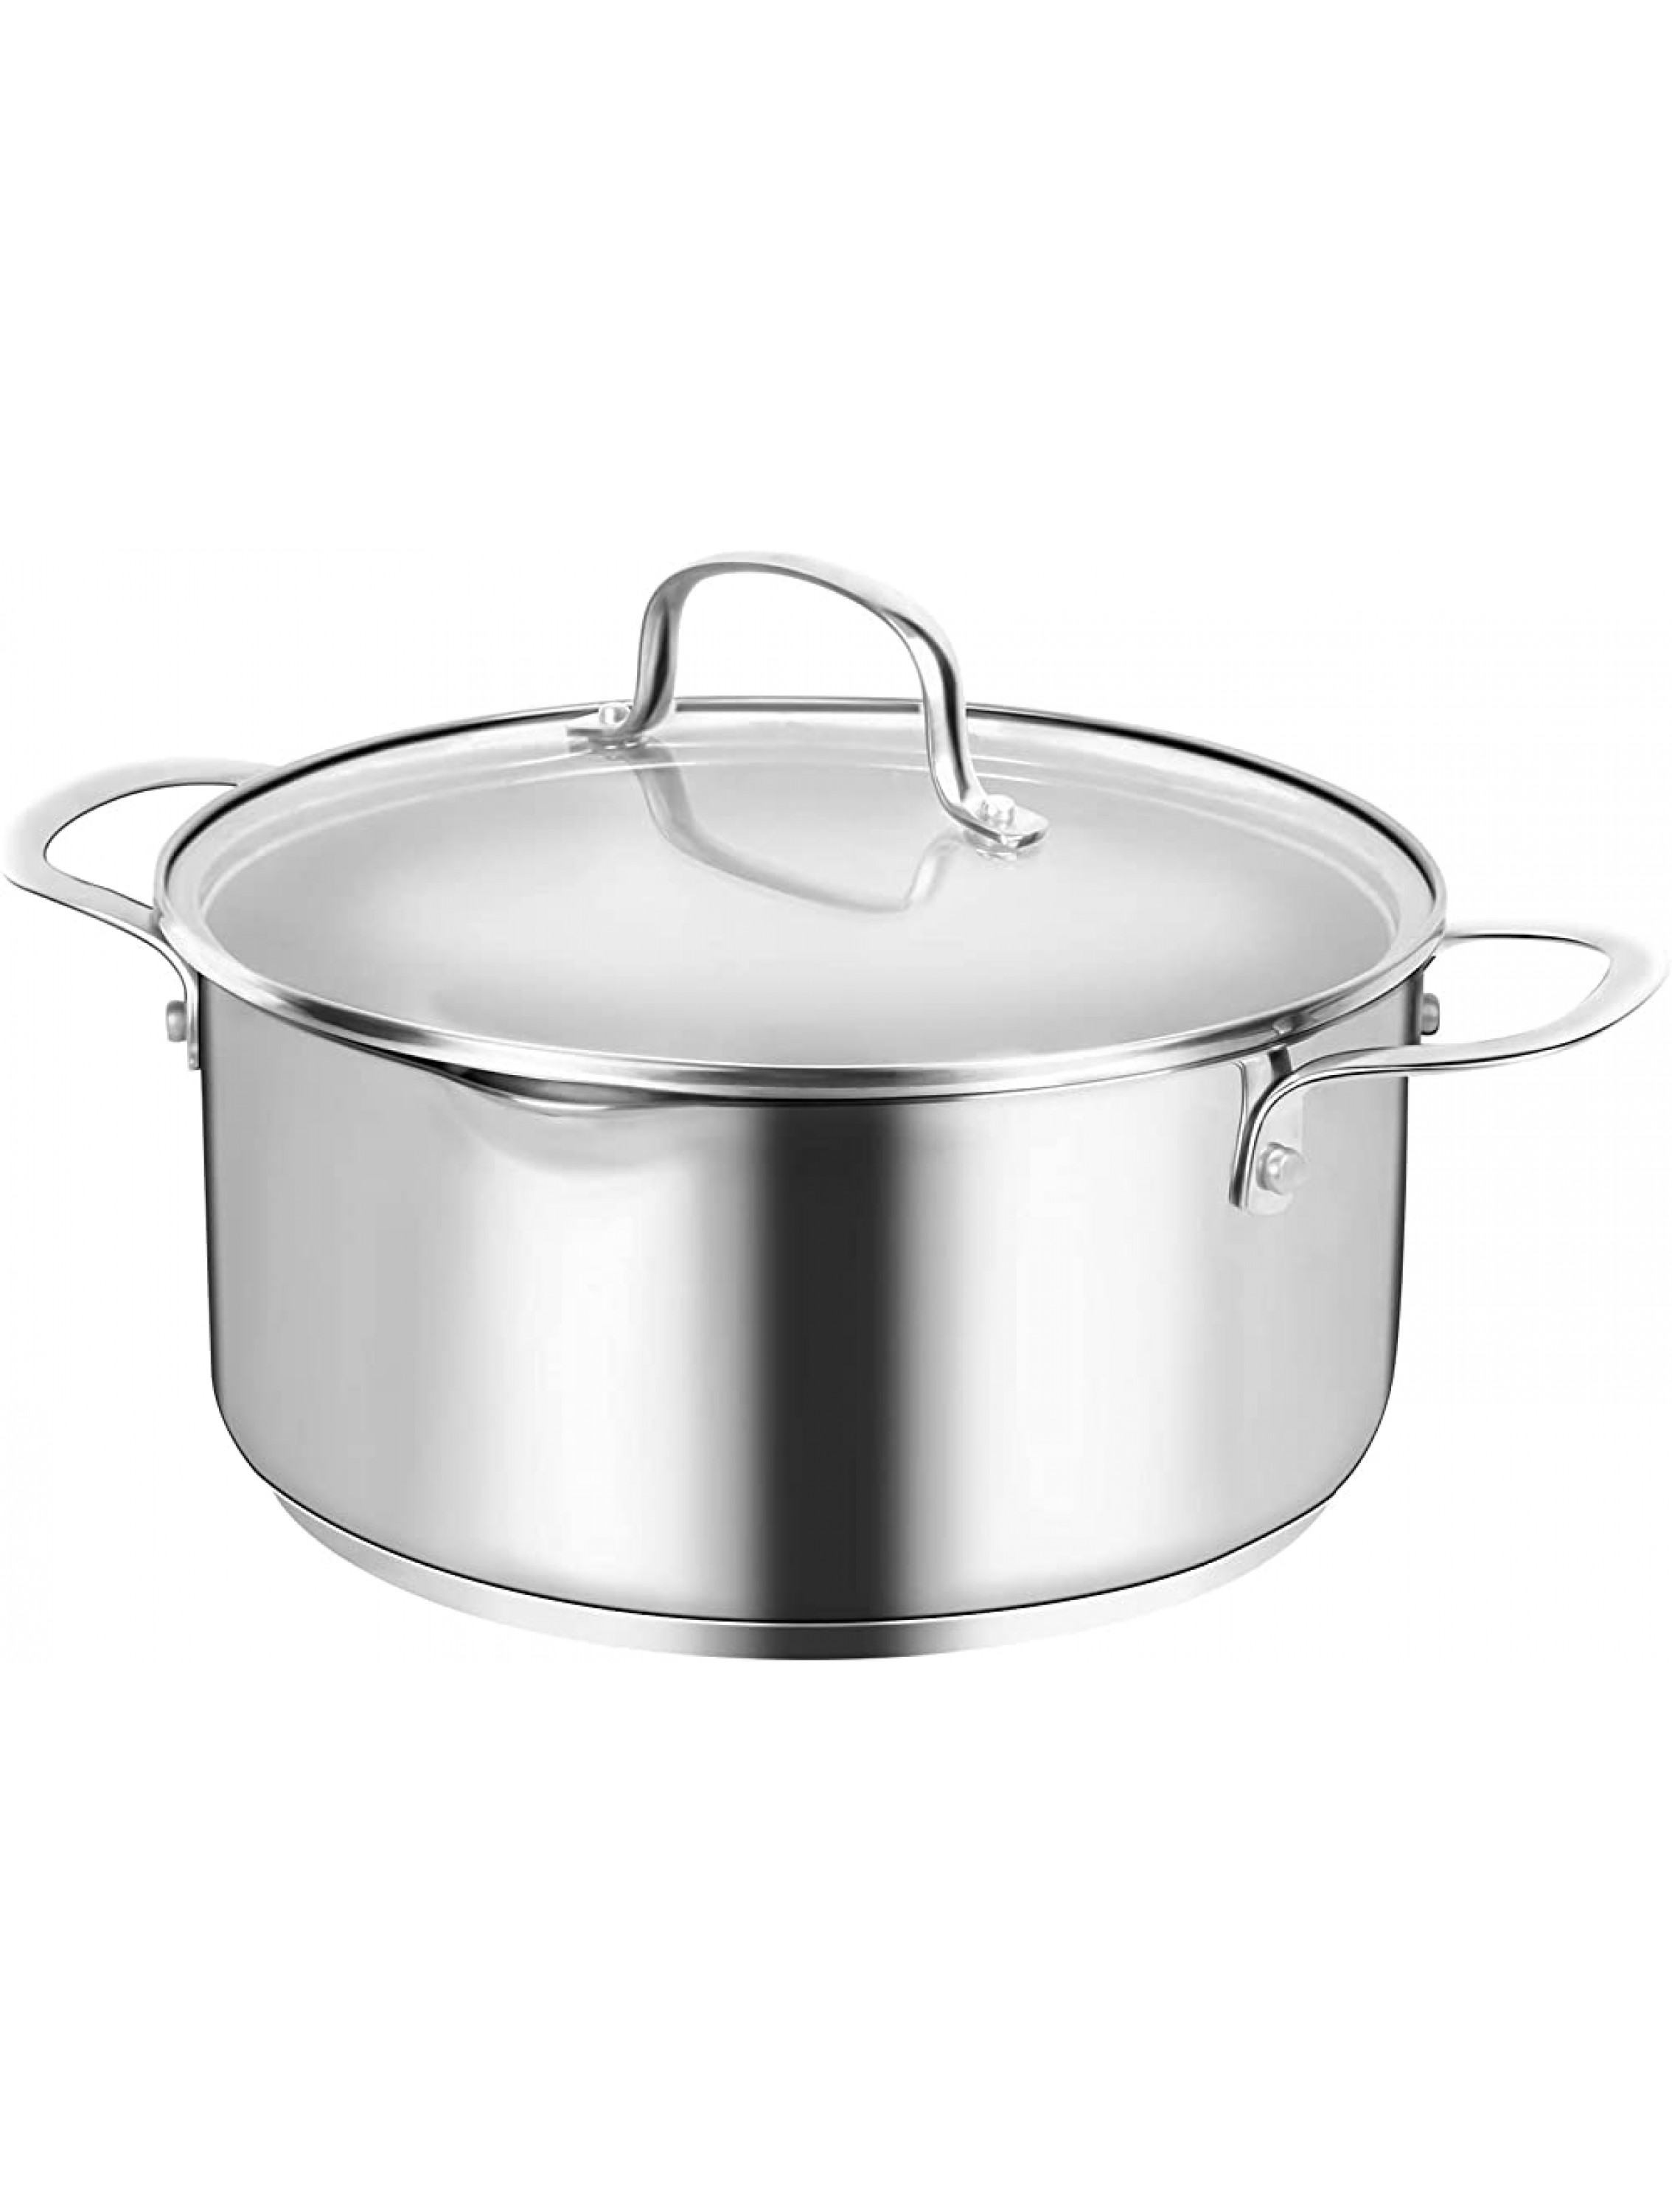 MOBUTA Stainless Steel Stockpot with Lid 5-Quart Stock pot Stew Pot Casserole Soup Pot for Induction Stovetop Tri-Ply Heavy Bottomed Base with Scale Mark & Tempered Glass Lid Dishwasher & Oven Safe - BC9DK3KIR